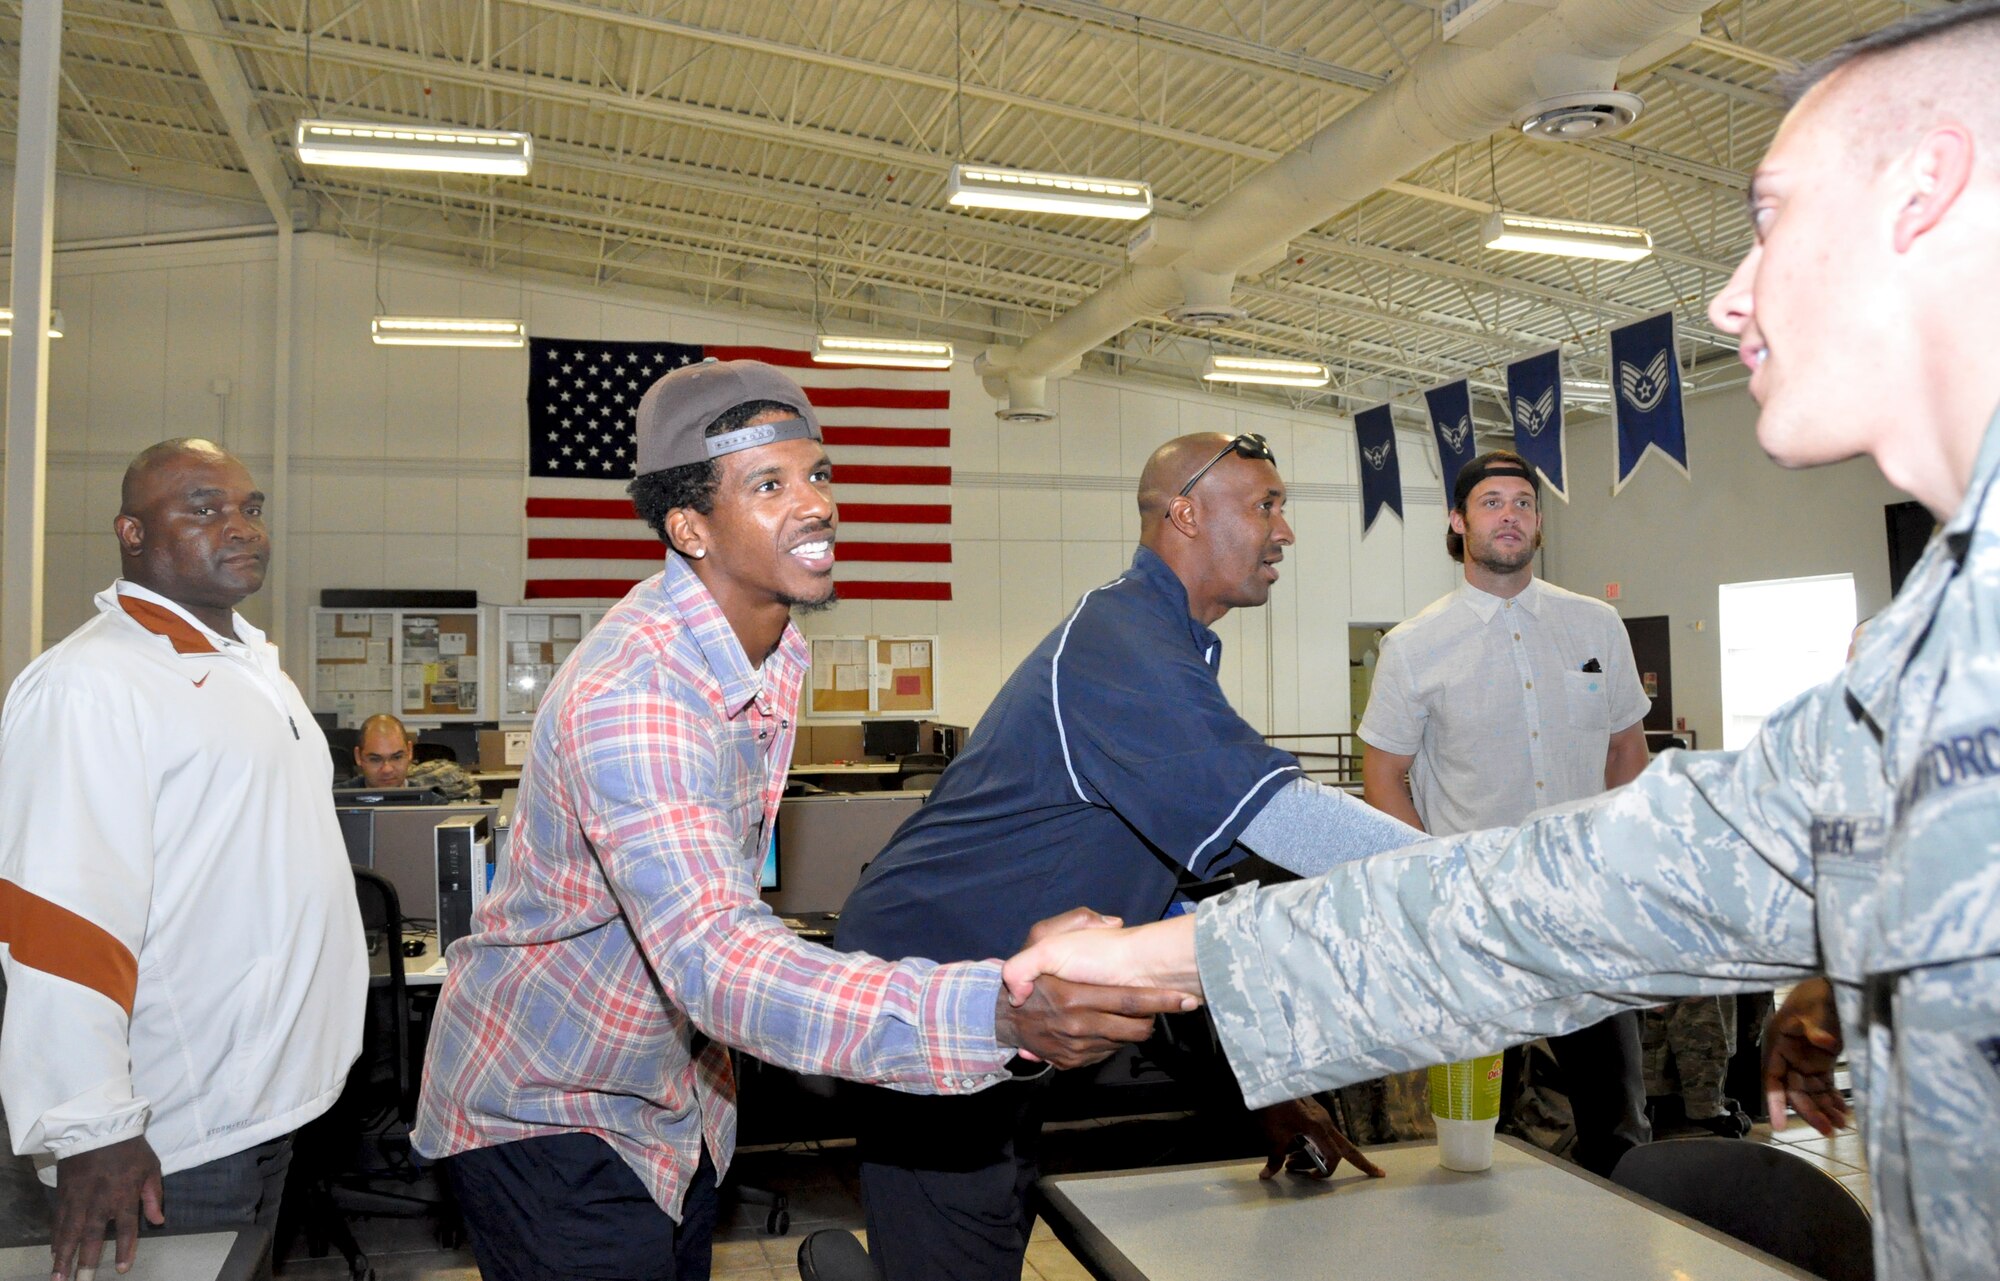 Four former National Football League members took time out to visit with 301st Fighter Wing members Oct. 22 just days before they are to deploy to Southwest Asia. Seen from left to right are James Gray, New England Patriots, Justin King, LA Rams, Byron Williams, NY Giants, and David Vabora, St. Louis Rams, as they shake hands with Capt. Jason Kitchen, 301st Aircraft Maintenance Squadron commander. (U.S. Air Force photo/MSgt. Julie Briden-Garcia) 